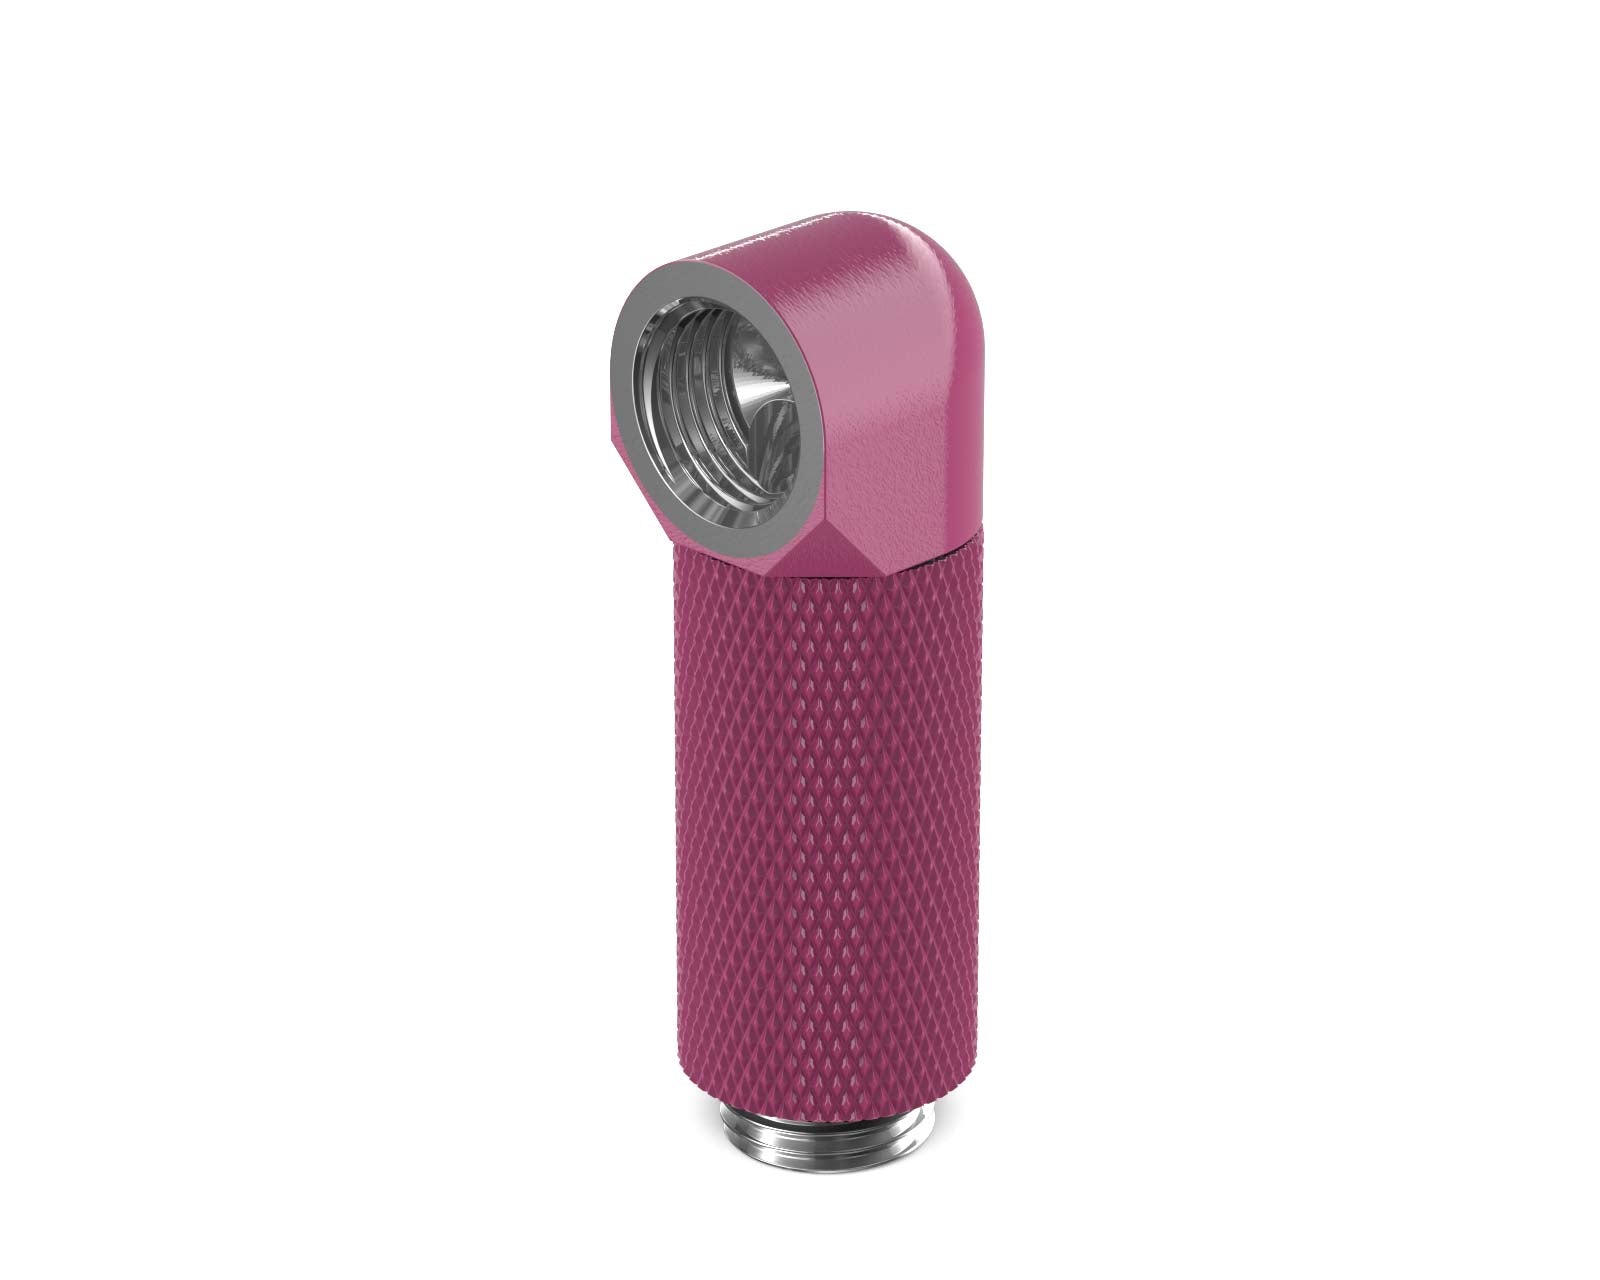 PrimoChill Male to Female G 1/4in. 90 Degree SX Rotary 35mm Extension Elbow Fitting - PrimoChill - KEEPING IT COOL Magenta